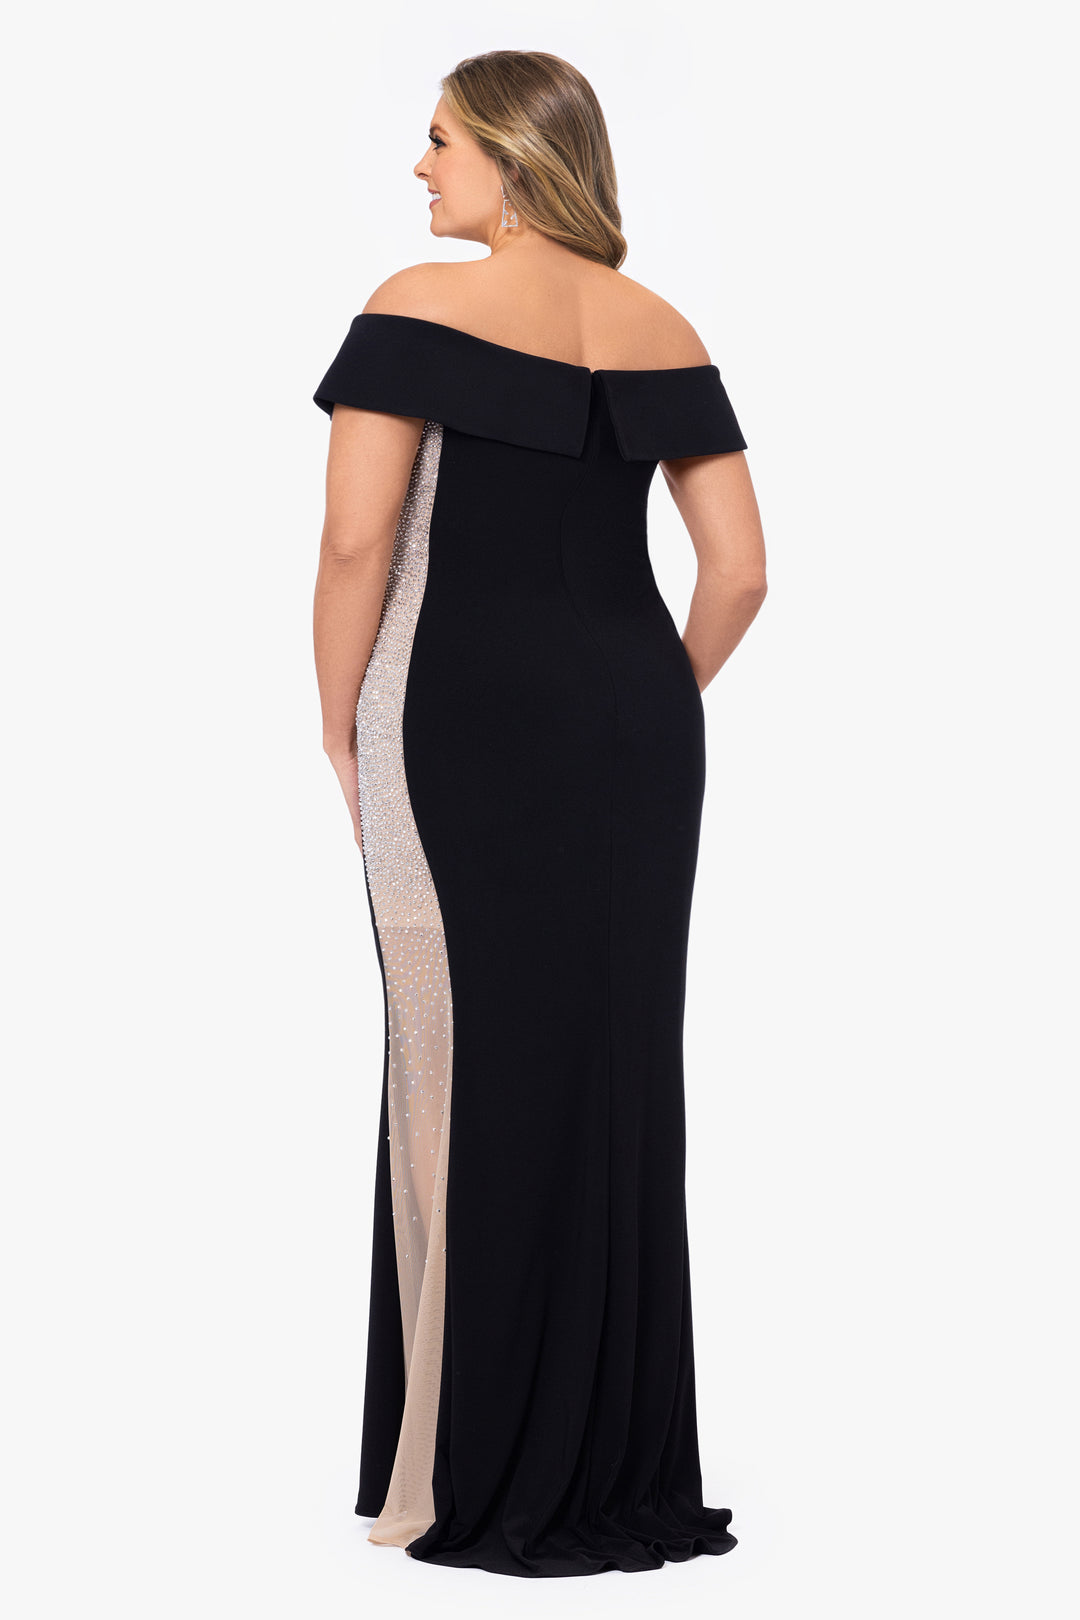 Plus "Brianna" Off the Shoulder Jersey Knit Caviar Beaded Gown